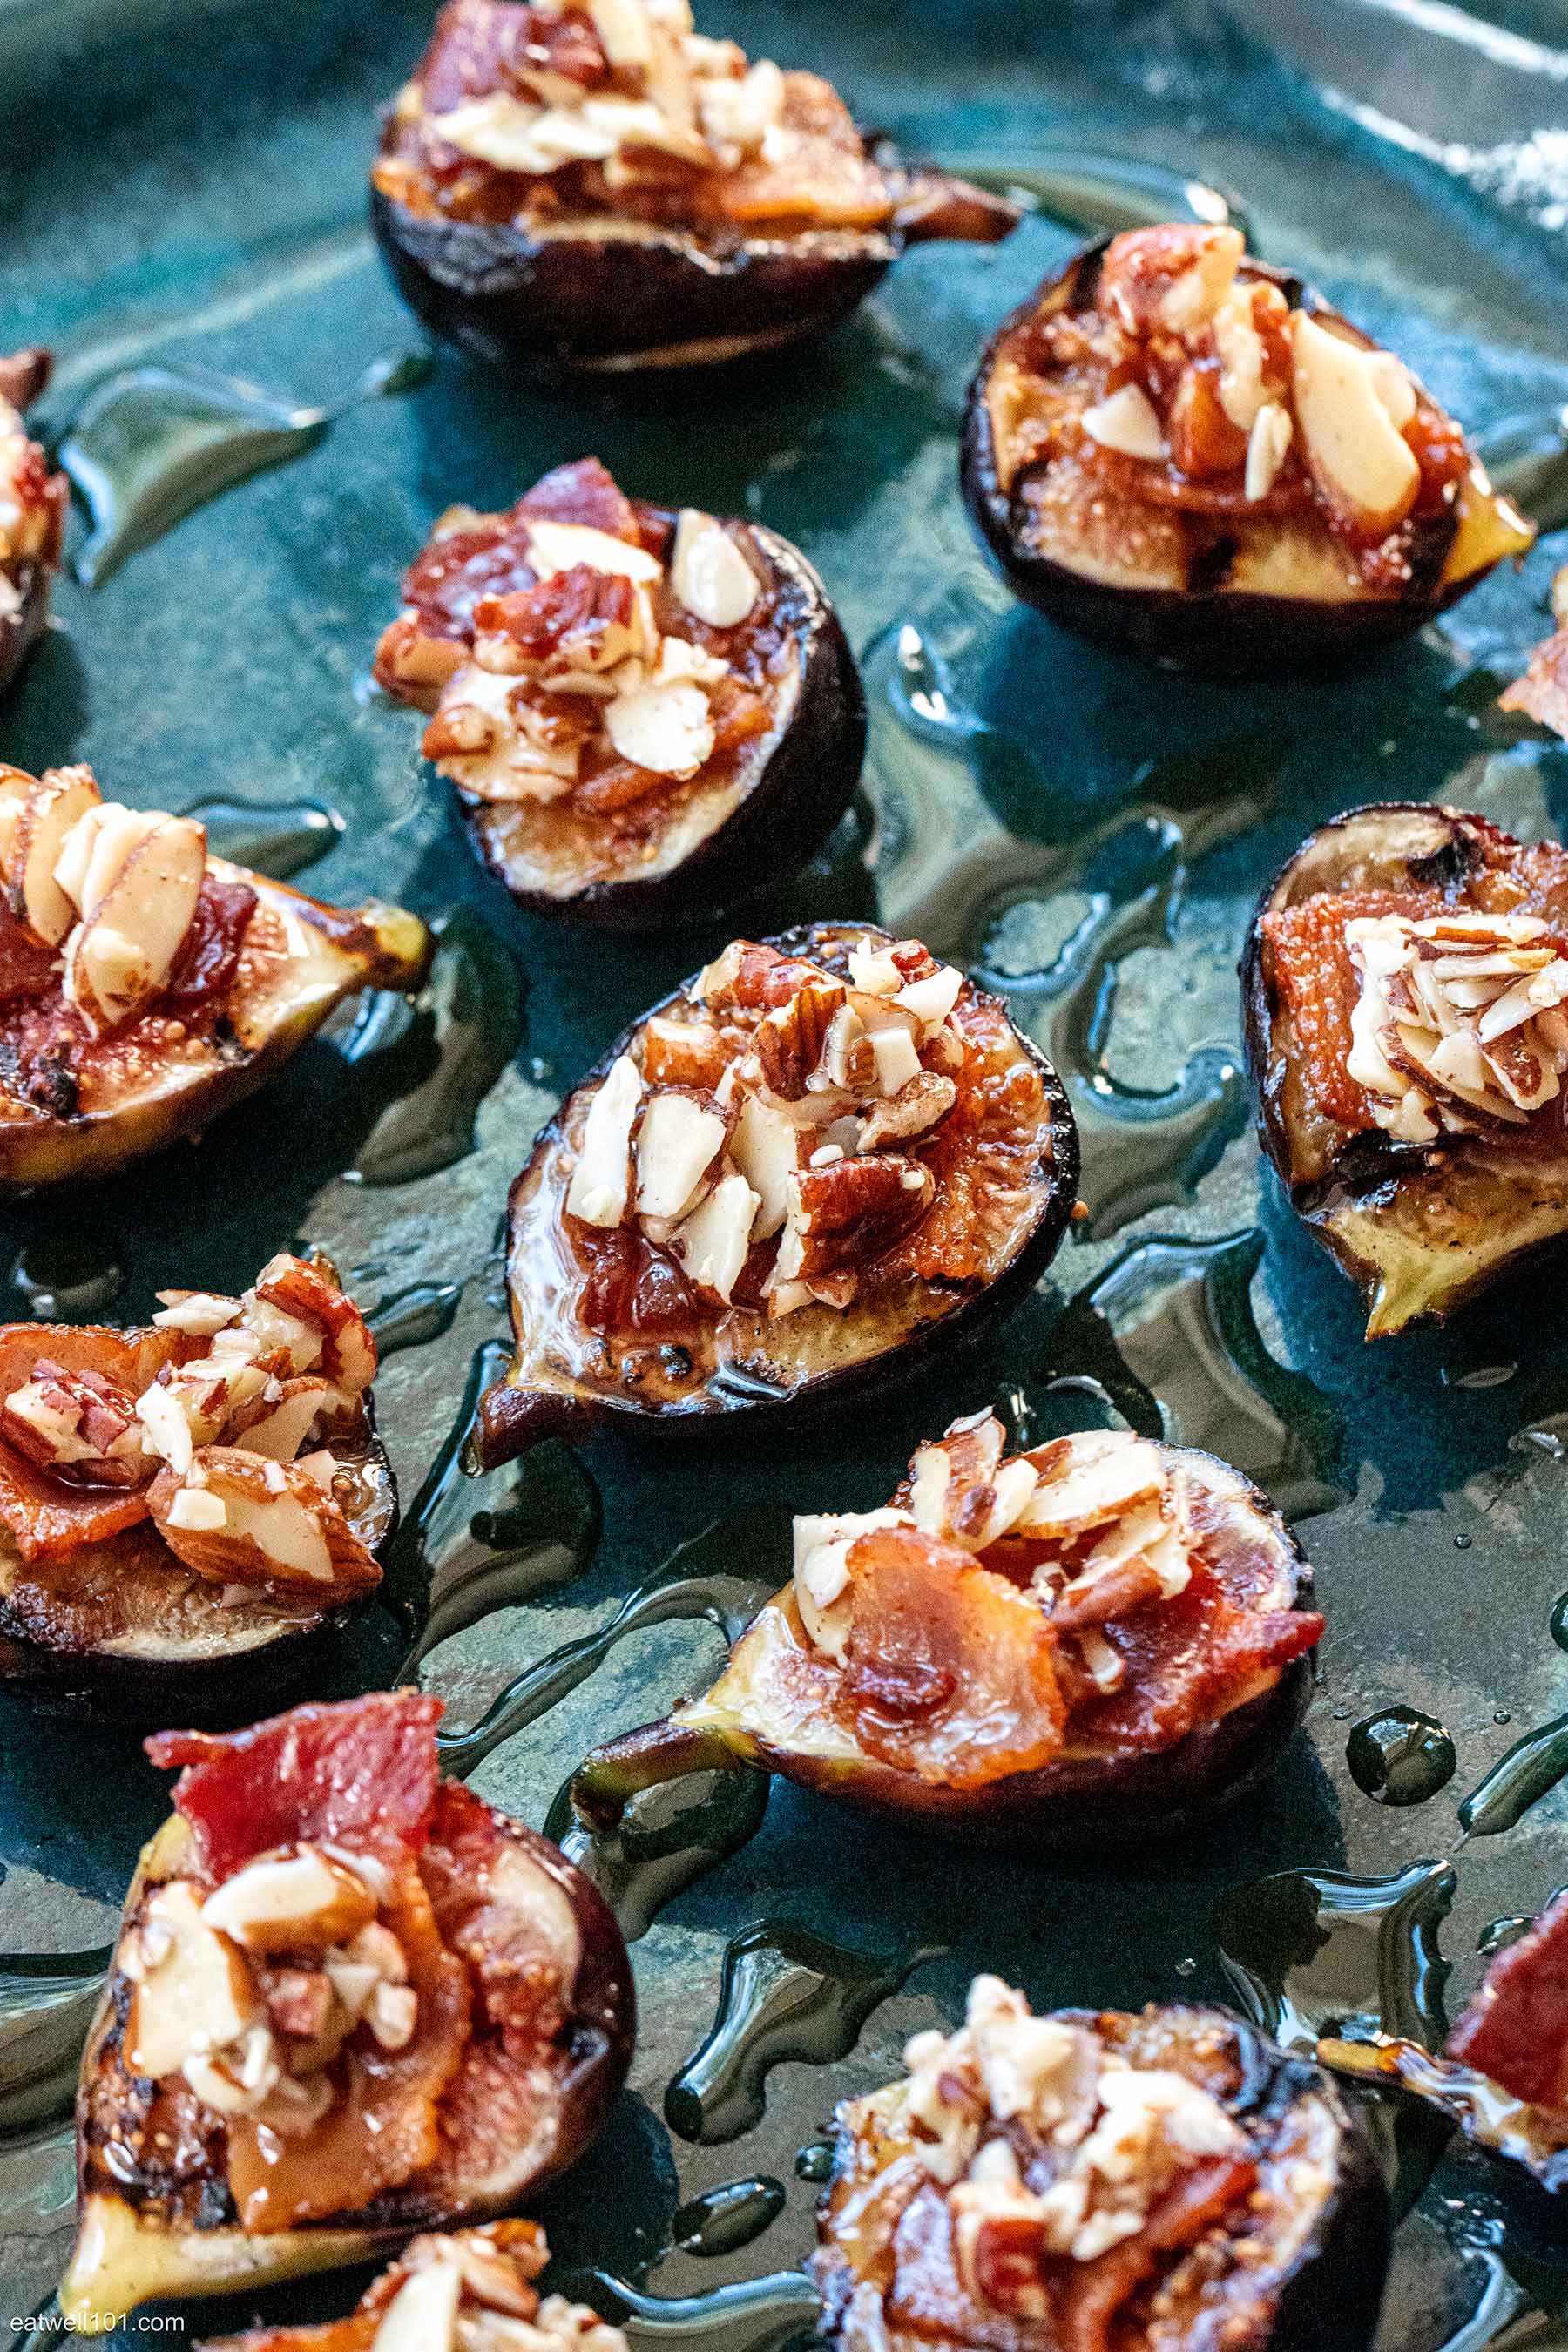 Grilled Figs with Bacon and Maple Syrup